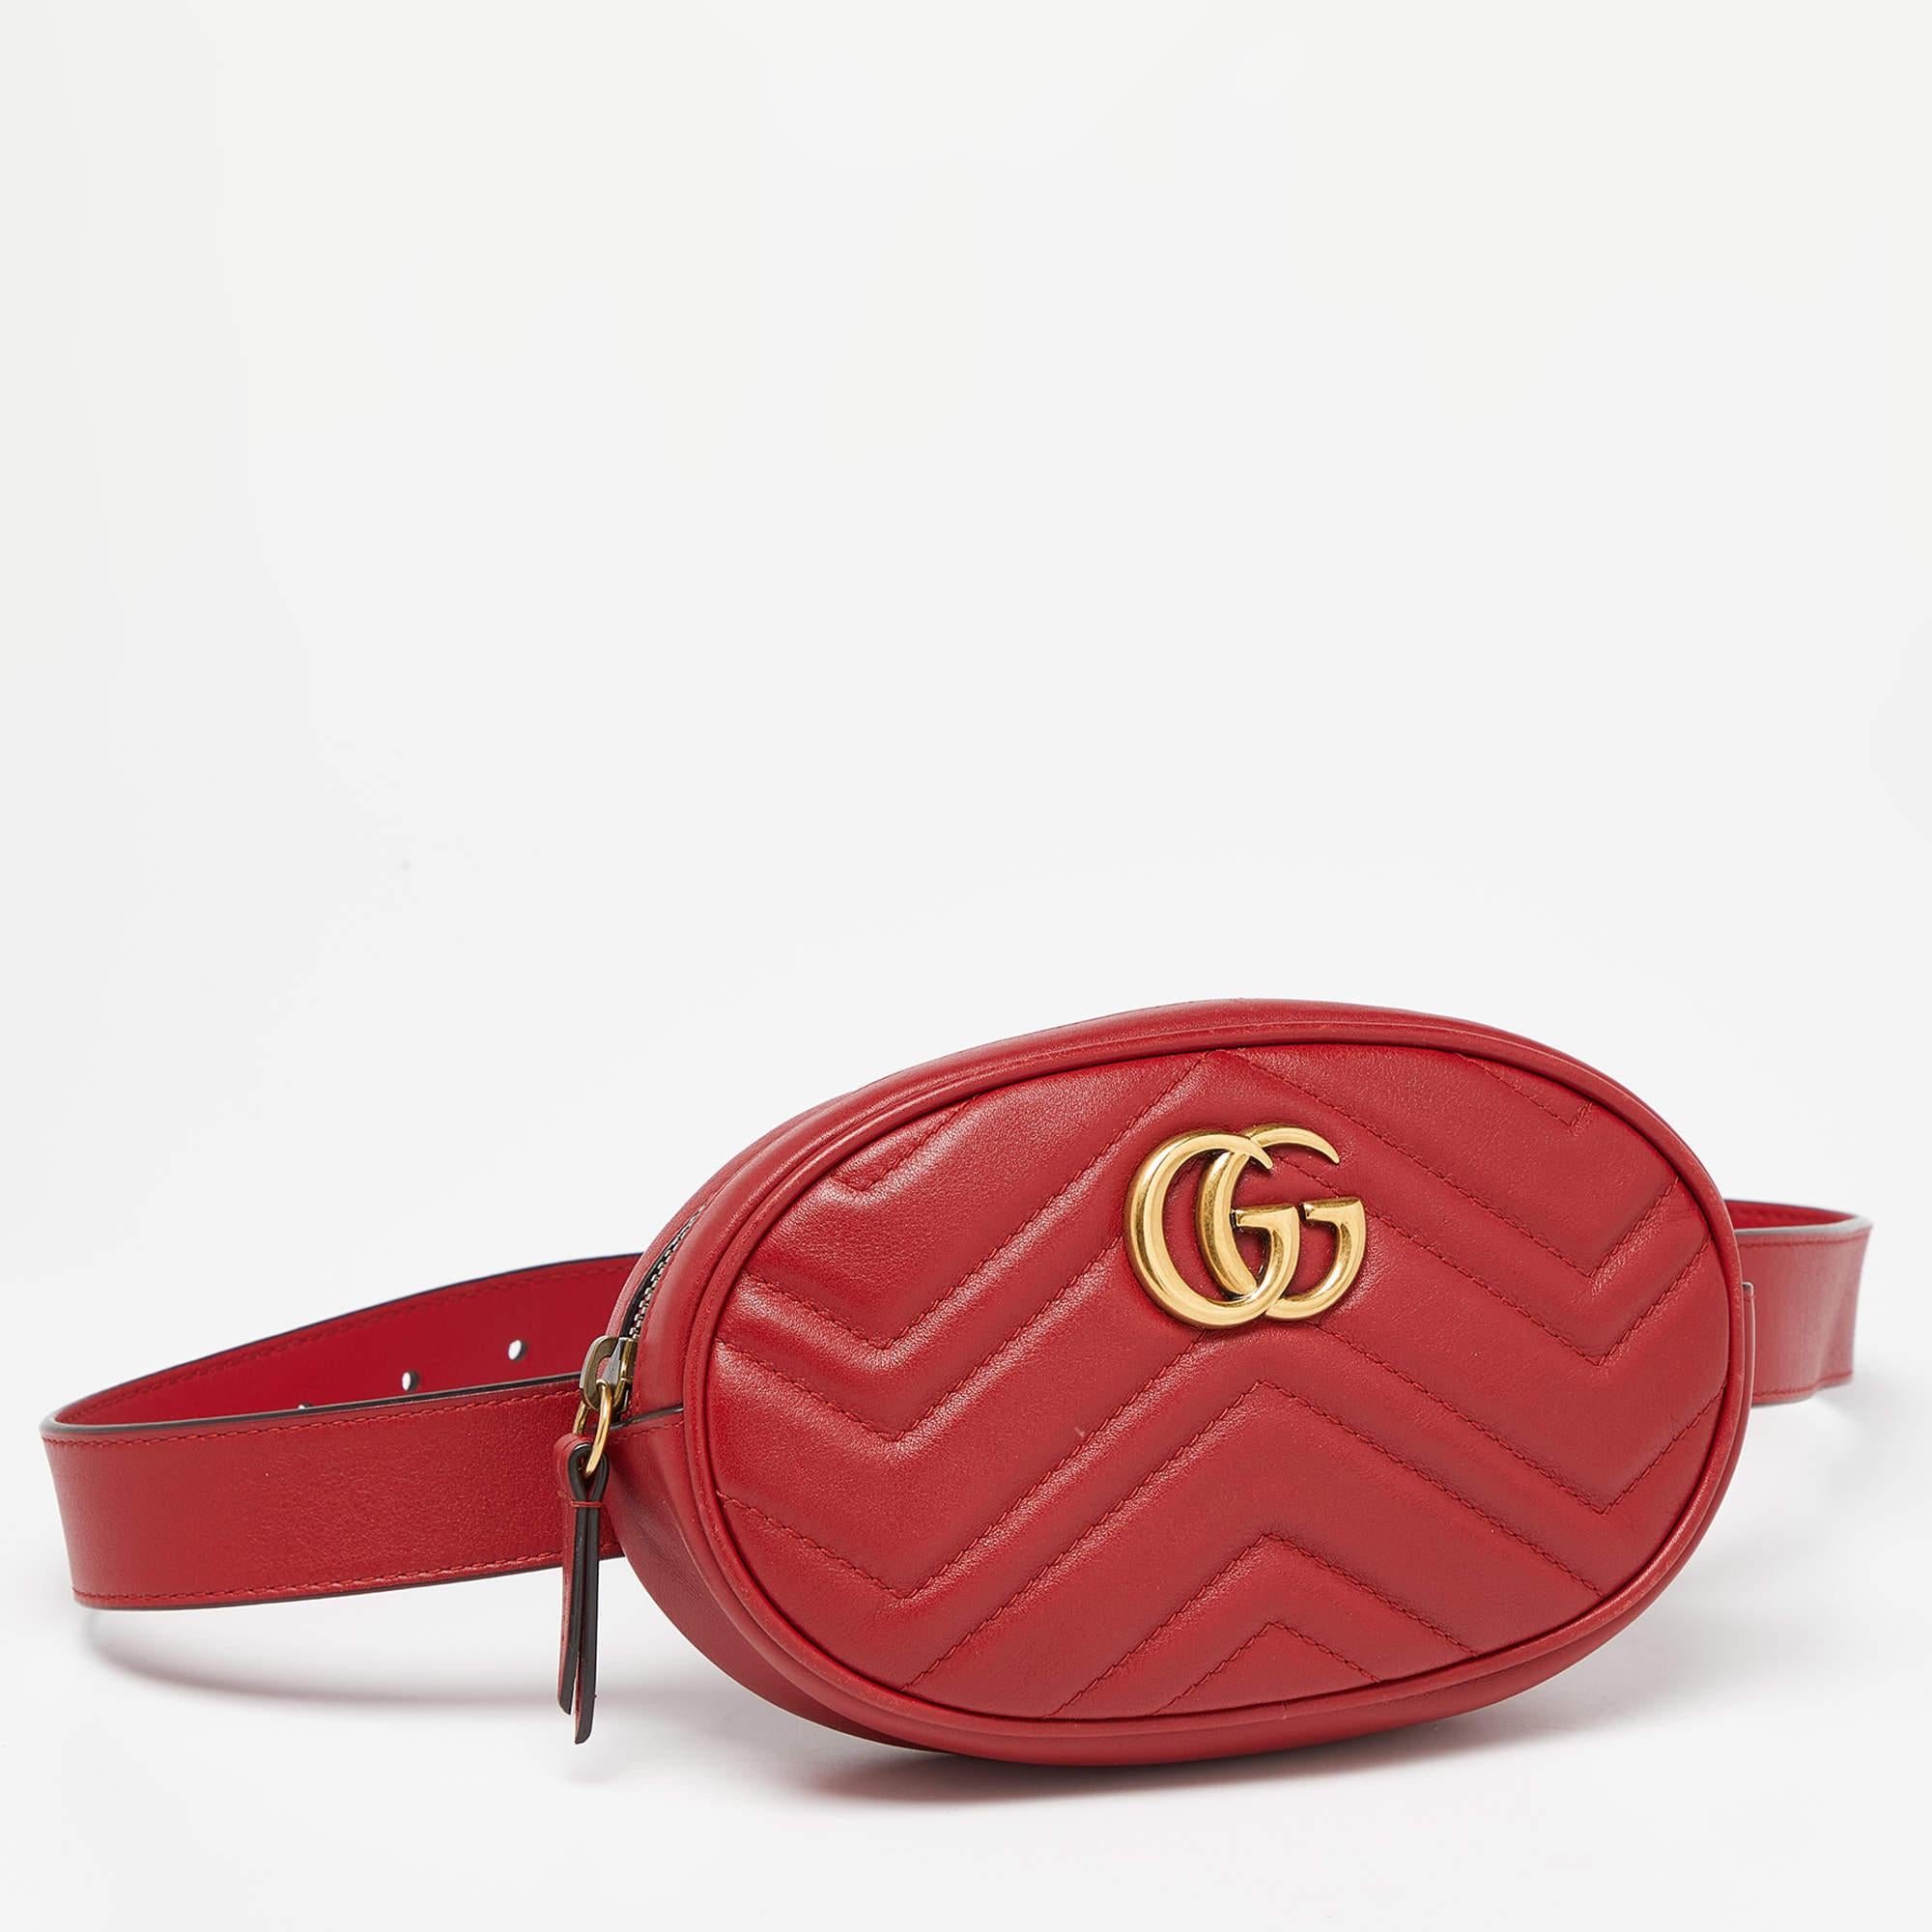 The Gucci GG Marmont belt bag is a stylish and versatile accessory. Crafted from red leather with matelassé stitching, it features the iconic GG logo, a zip closure, and an adjustable belt strap. Perfect for hands-free convenience and adding a touch